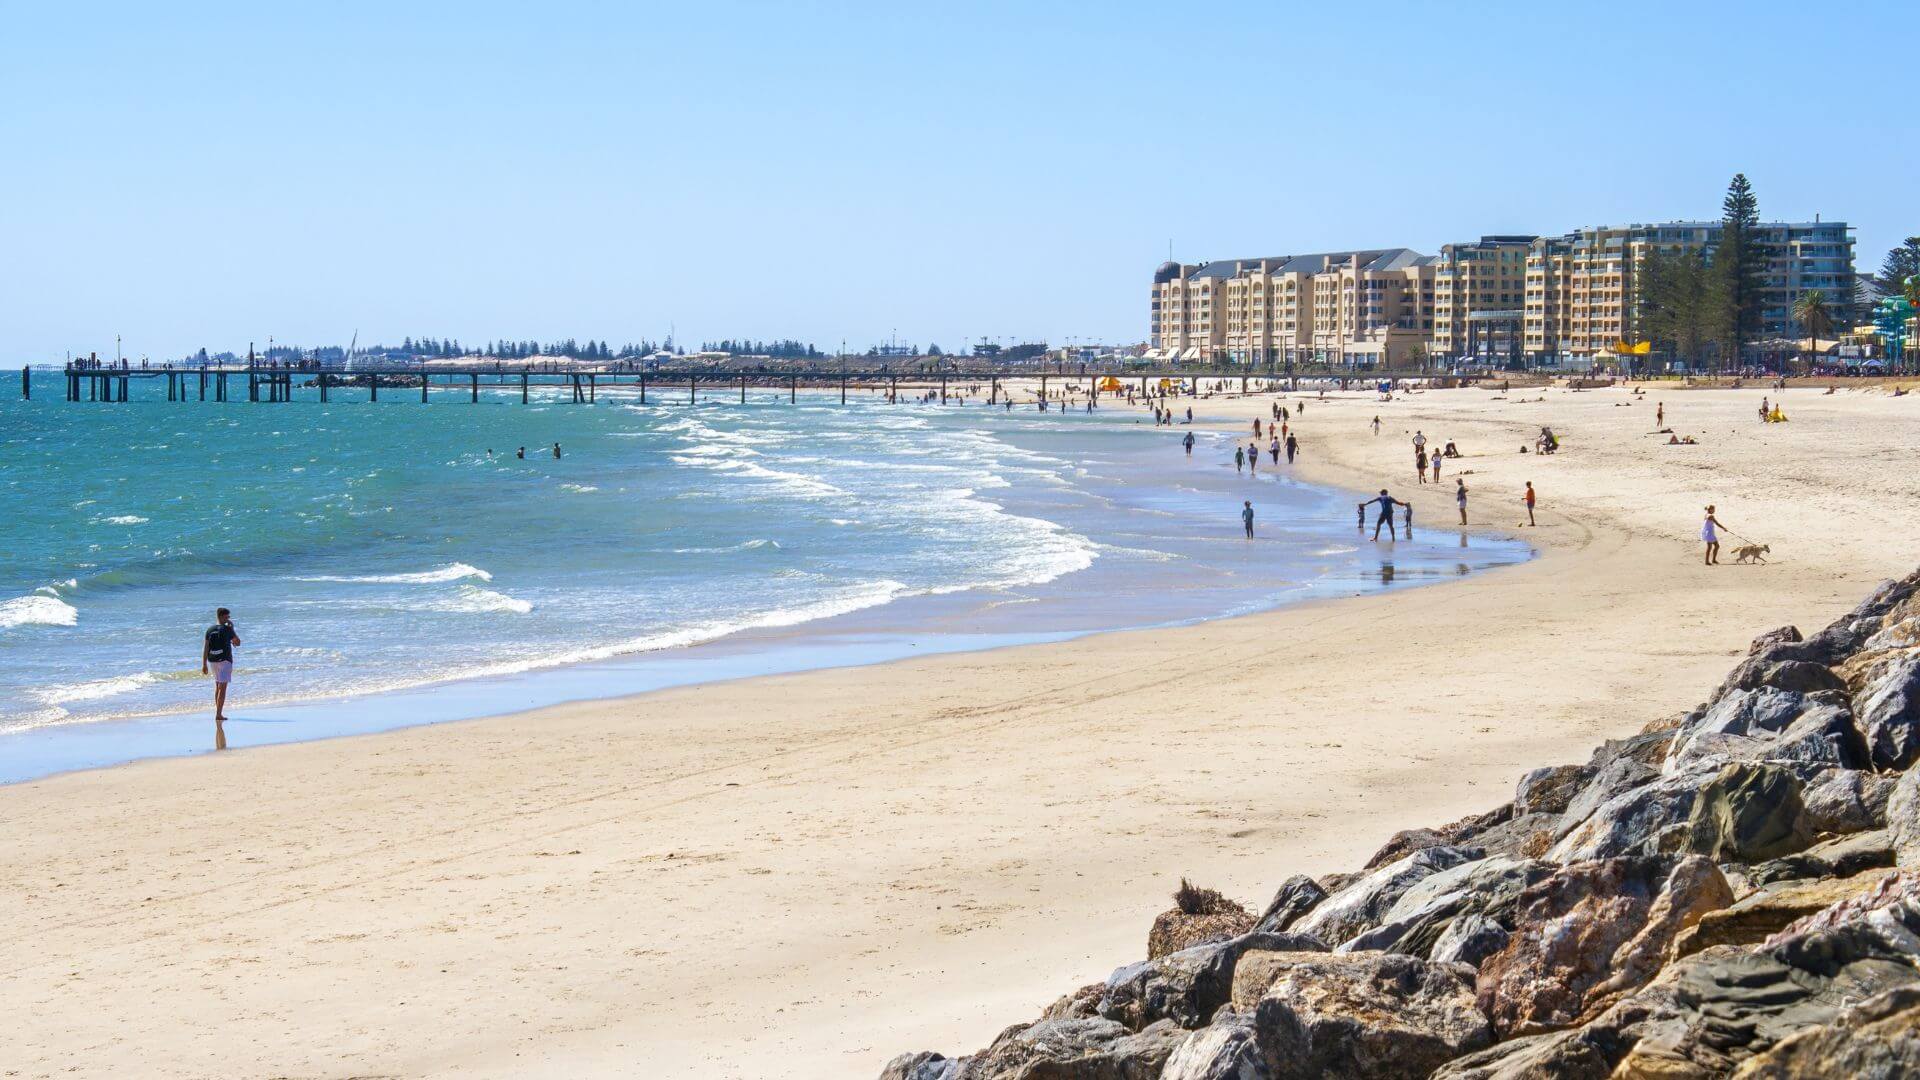 A bustling beach scene at Glenelg, South Australia, with golden sands meeting gentle waves. People enjoy various activities, from walking to playing, under a bright blue sky. In the background, the Glenelg Pier extends into the sea, while a row of coastal apartment buildings lines the shore, reflecting the popular and vibrant seaside suburb's lifestyle.